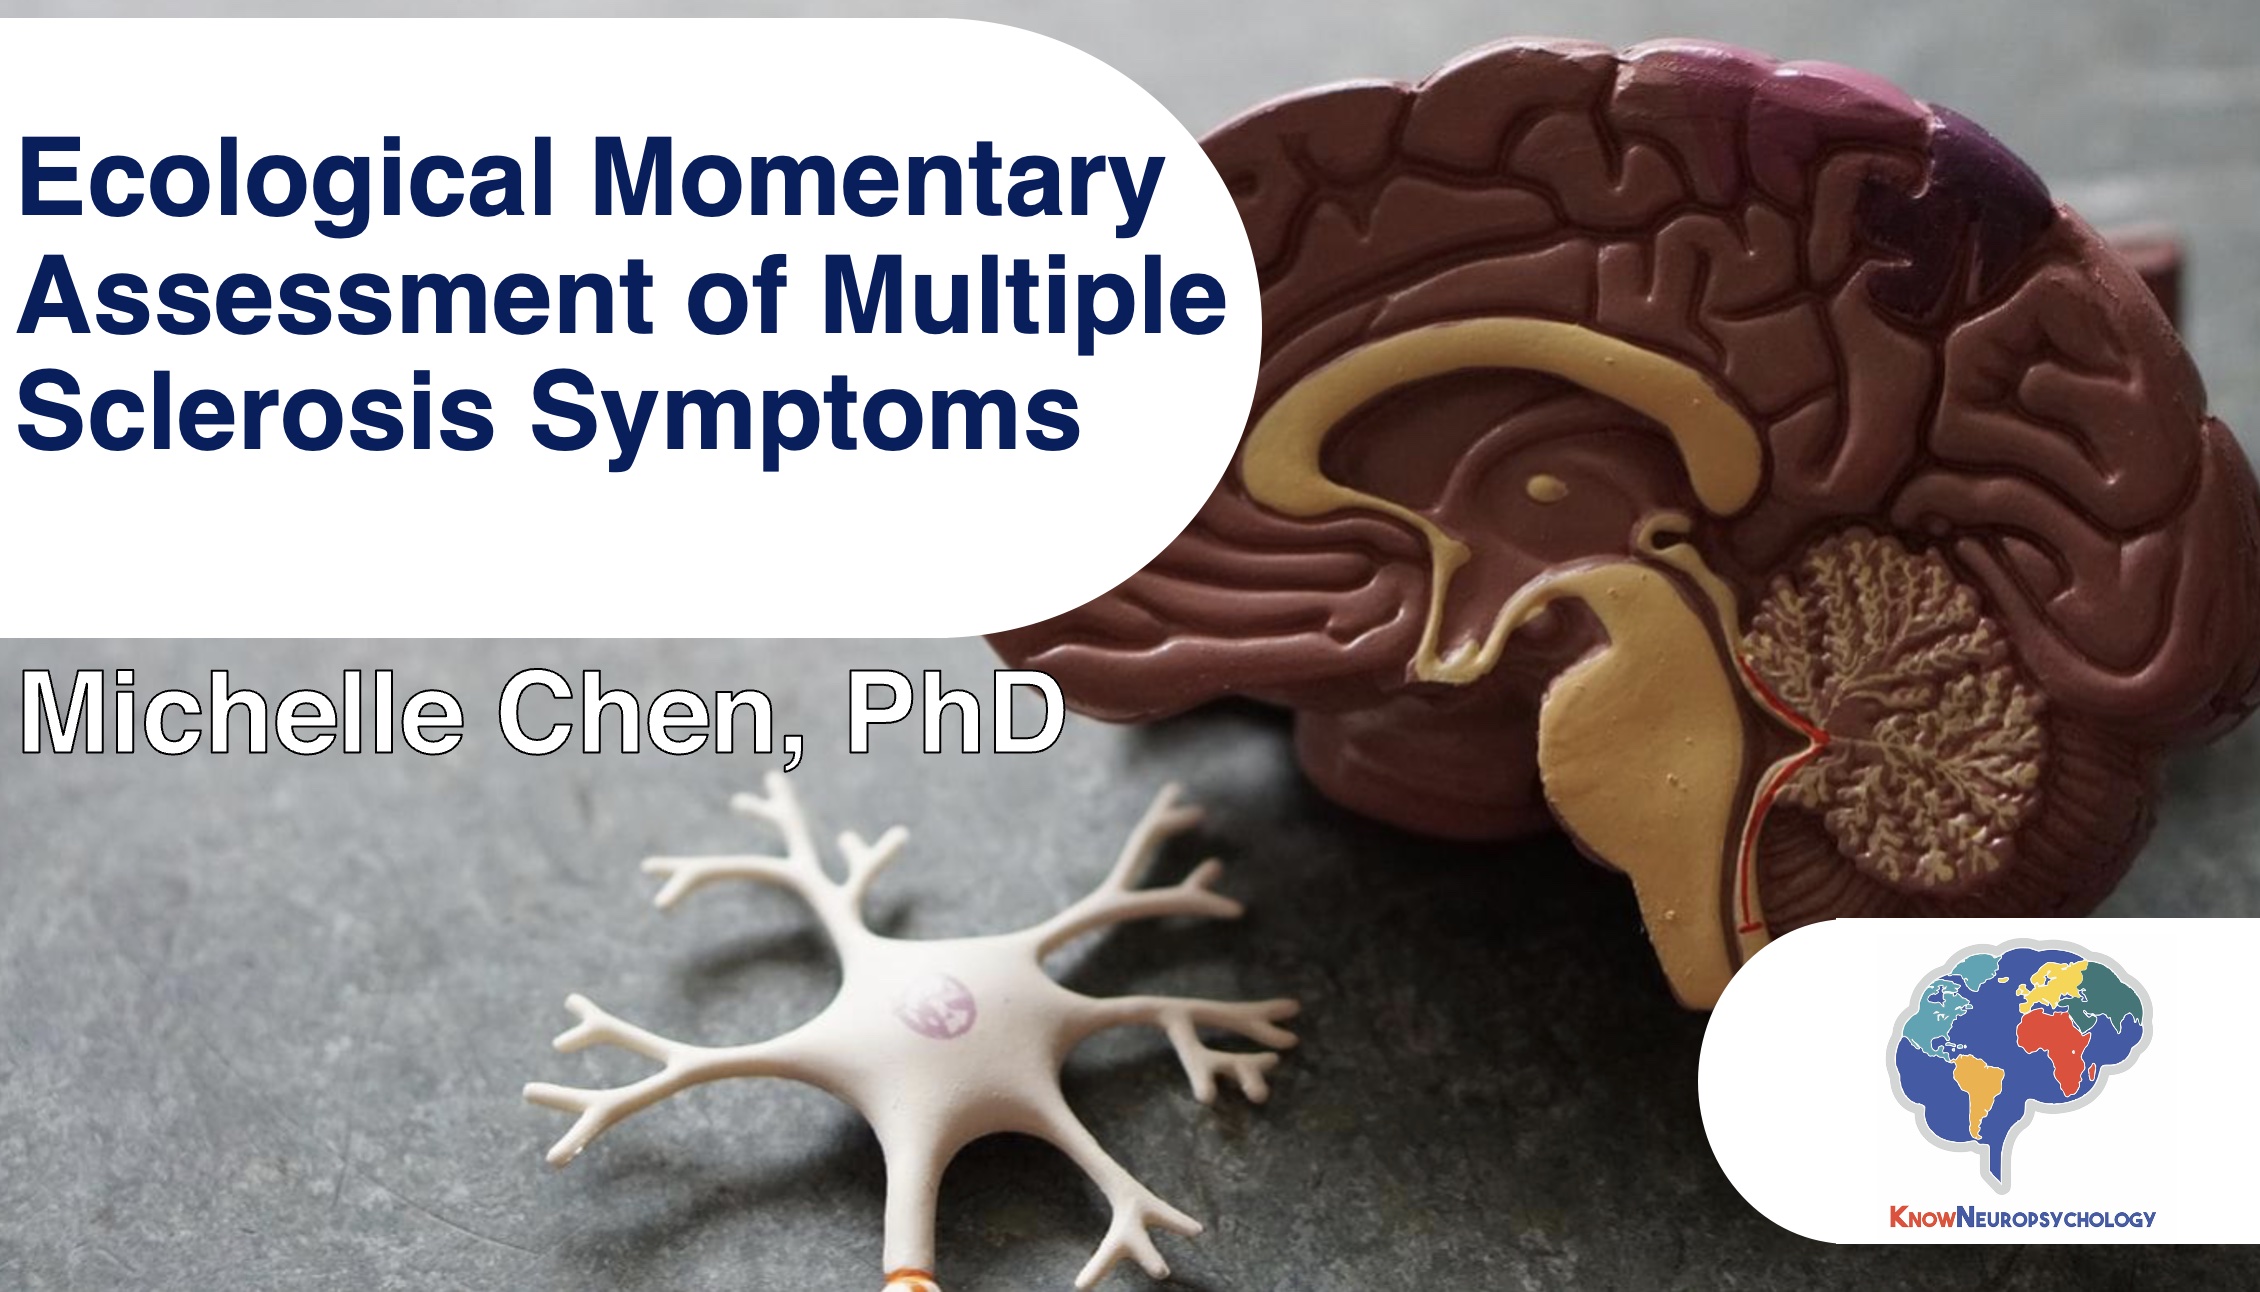 Ecological momentary assessment of multiple sclerosis with Dr. Michelle Chen